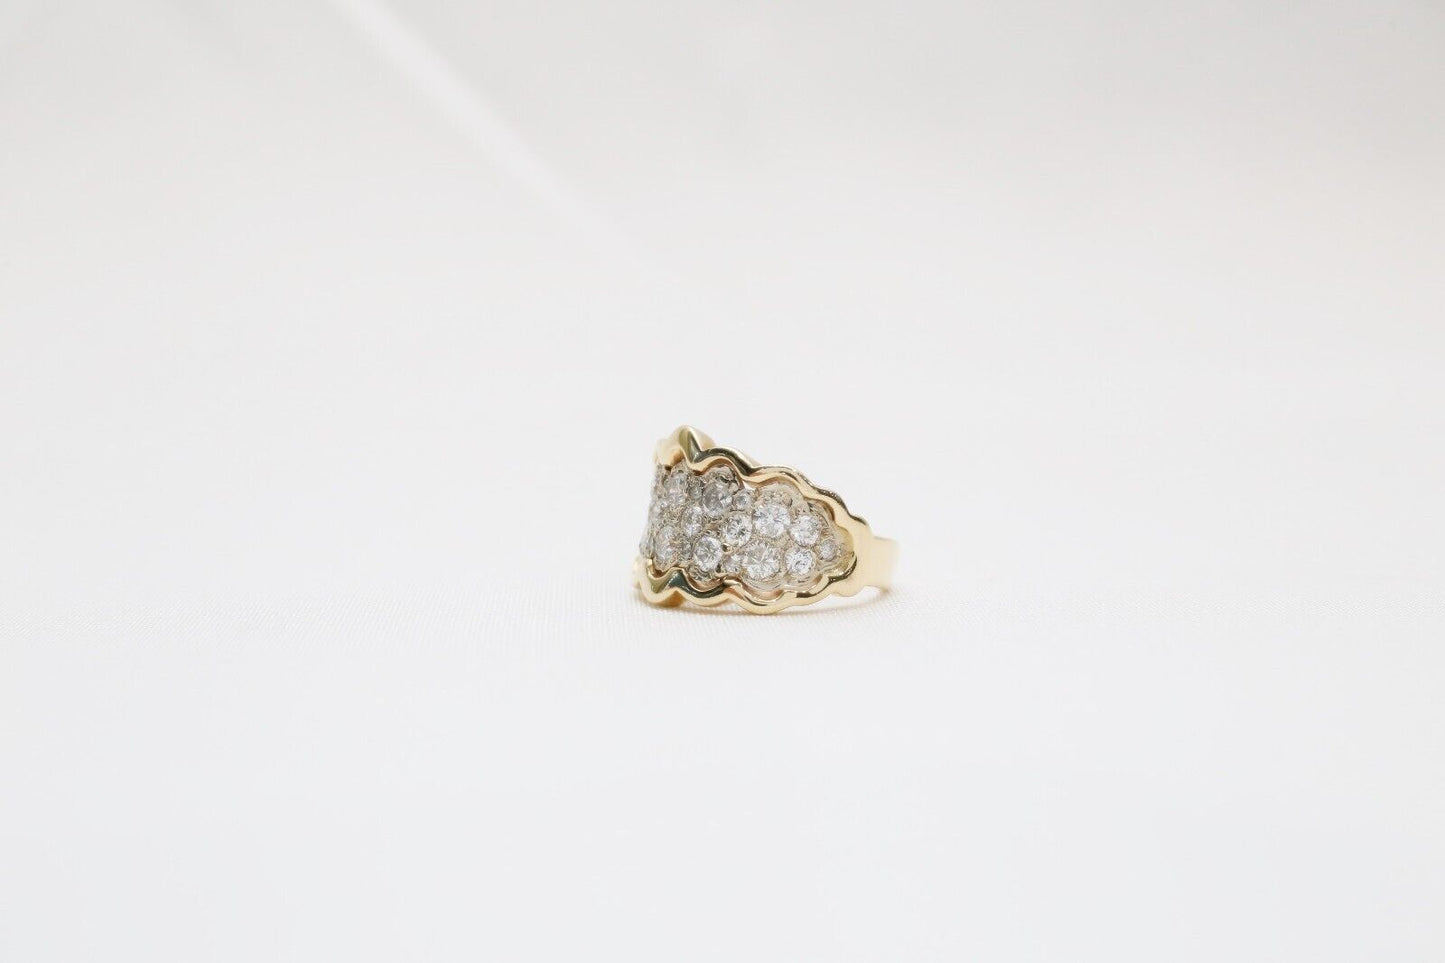 14k Yellow Gold Diamond Cluster RIng, Size 8.5 - 10.7g